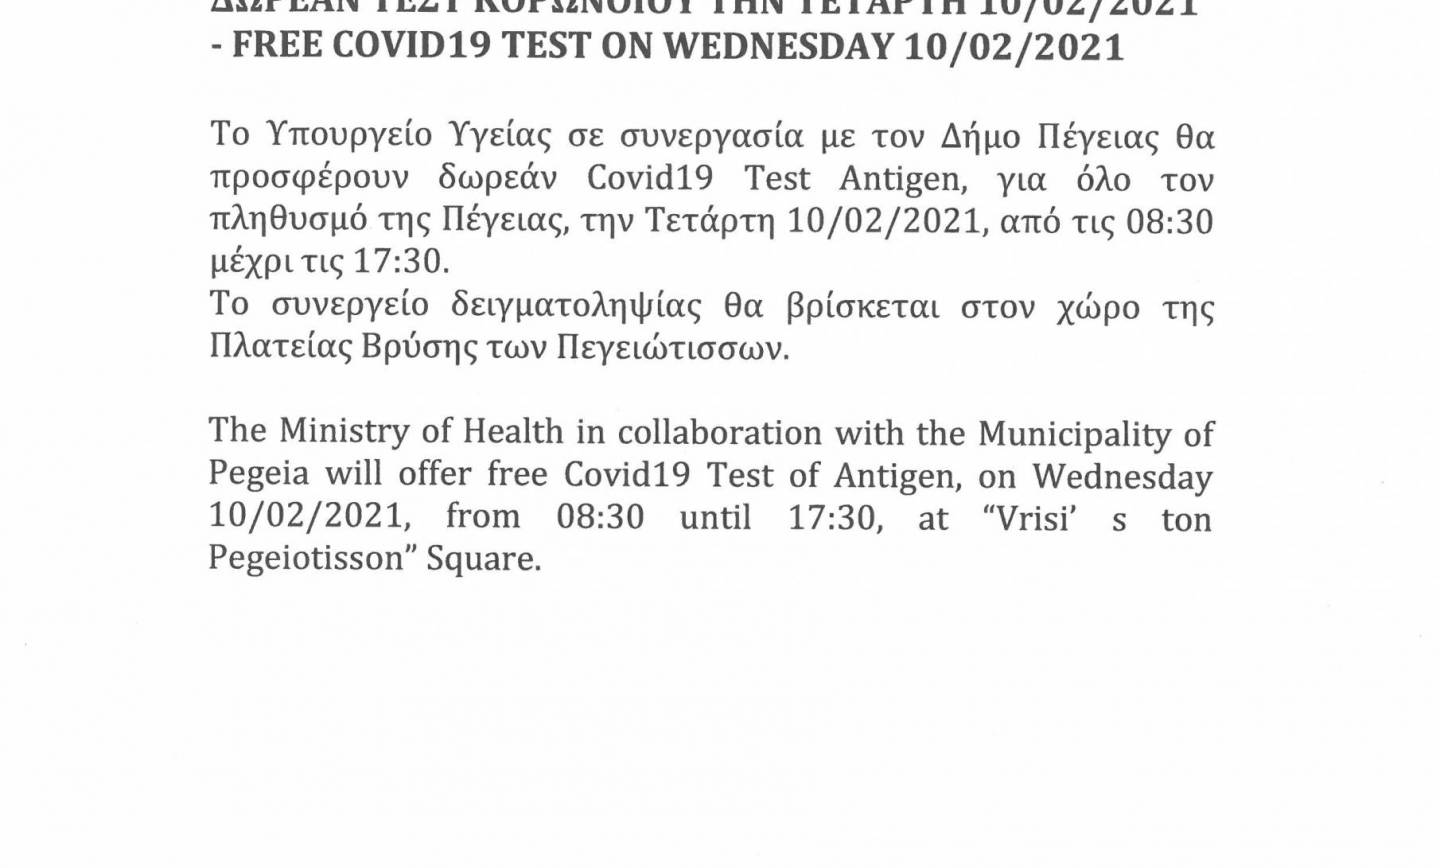 FREE COVID19 TEST ON WEDNESDAY 10/02/2021